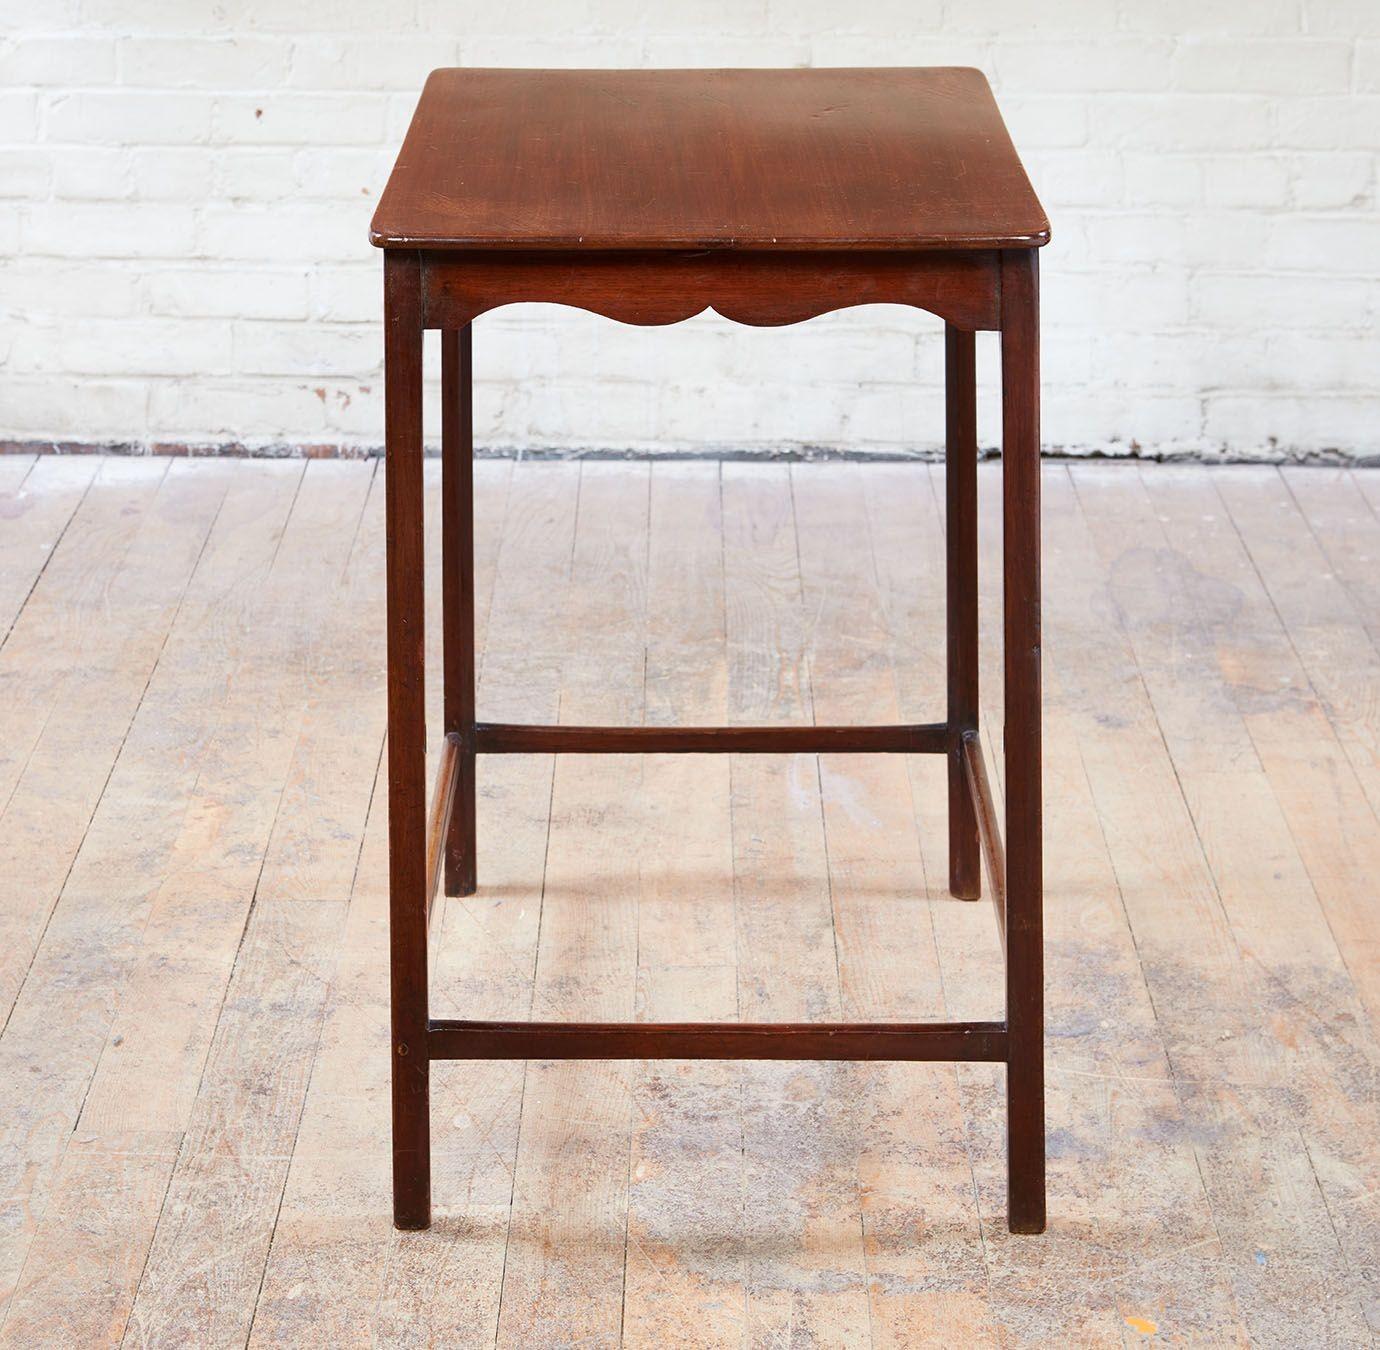 Late 18th Century Spider Leg Table For Sale